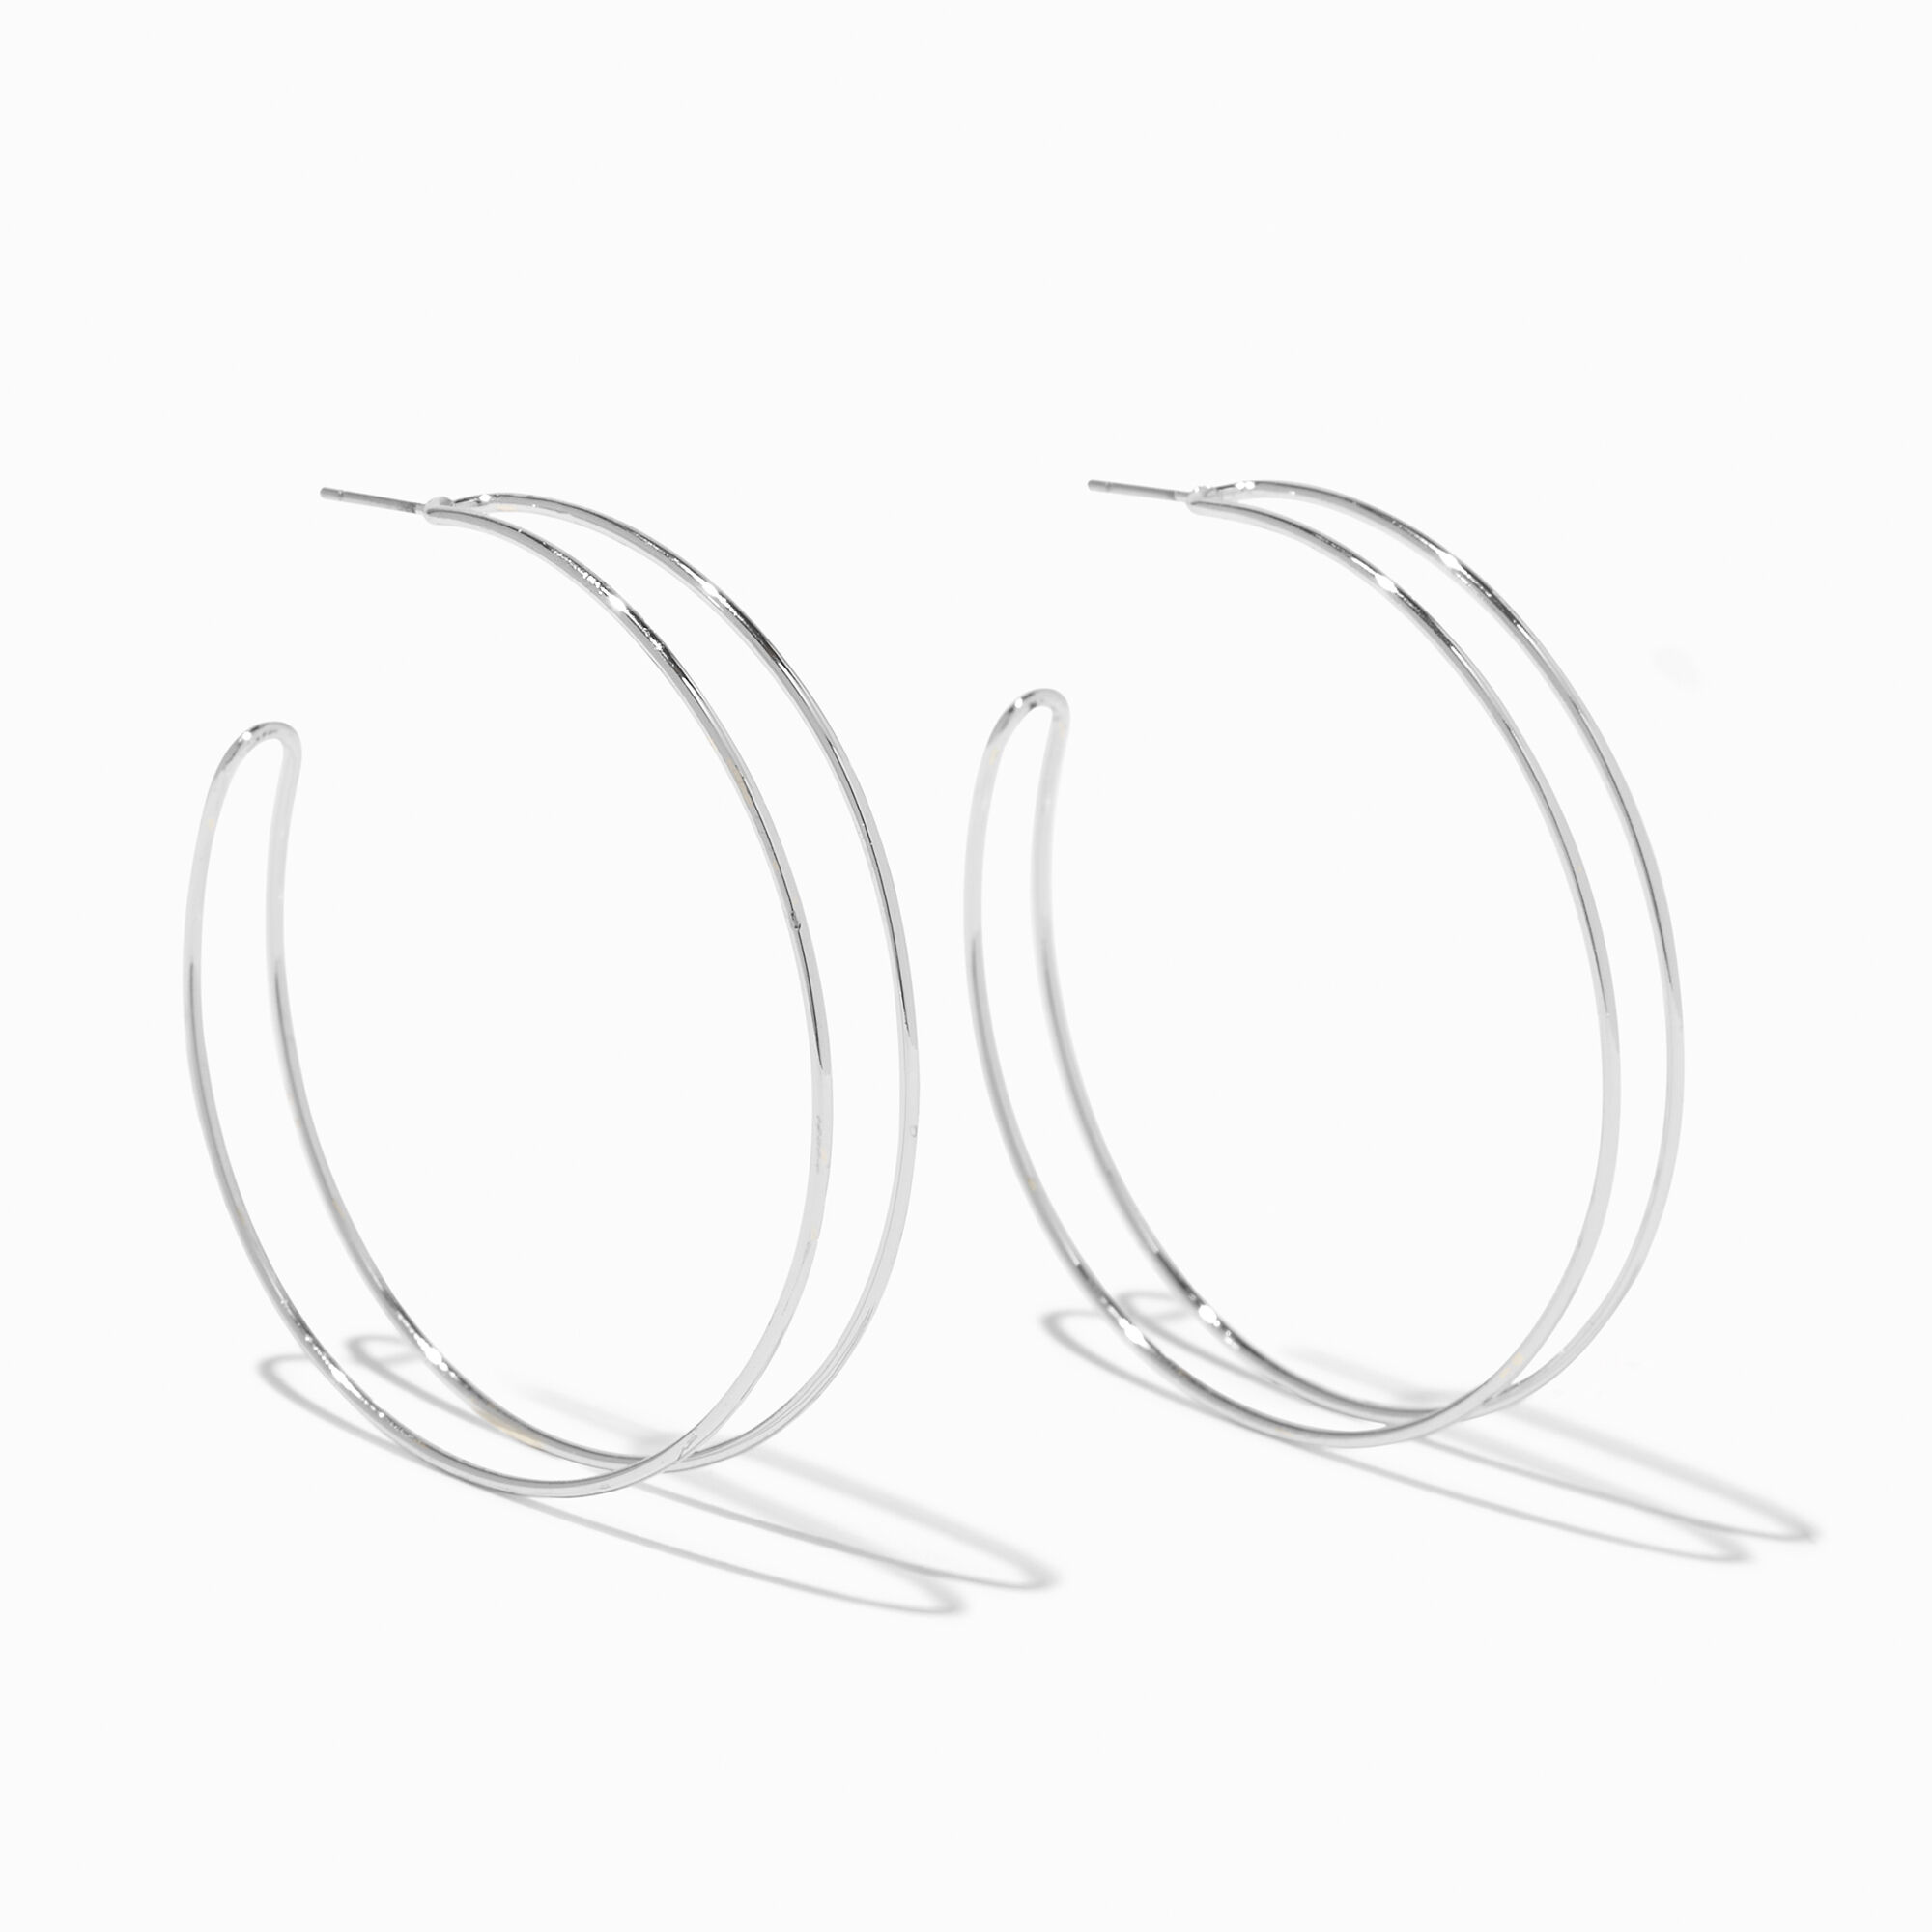 View Claires Tone 60MM Double Hoop Earrings Silver information